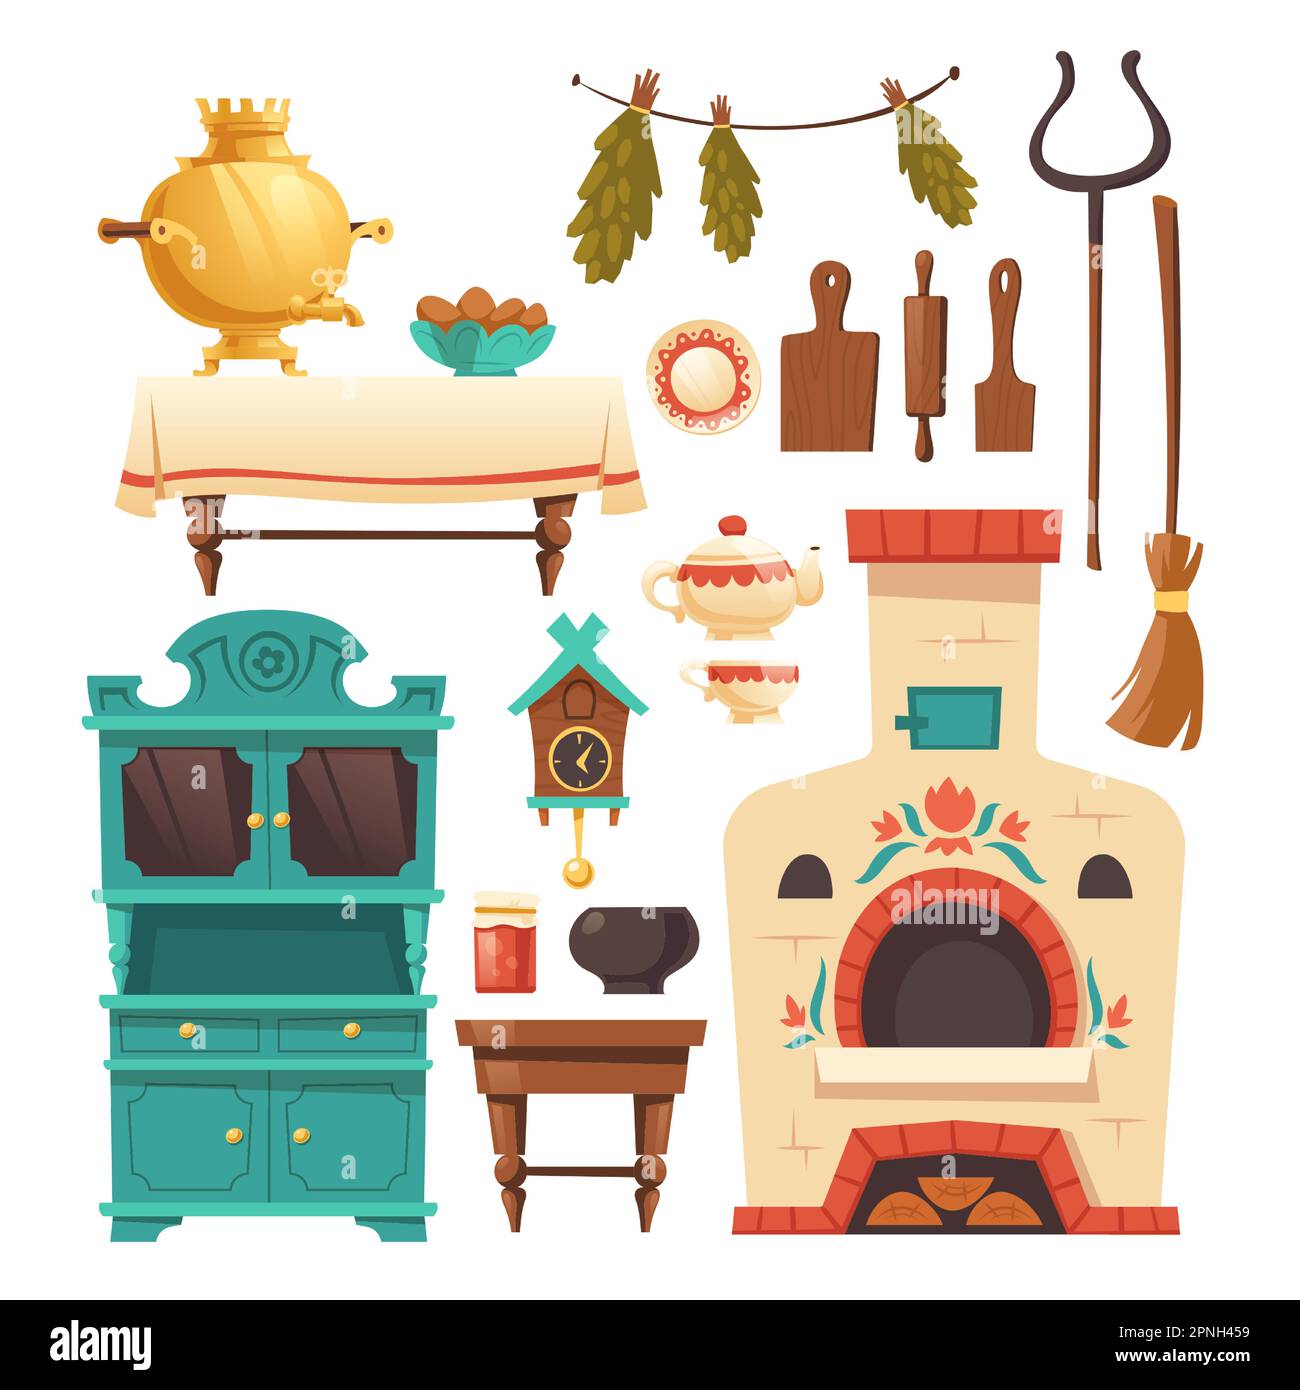 Interior elements of old russian kitchen with oven, samovar, cuckoo-clock and grip. Vector set of traditional ukrainian ancient furniture in rural house with stove isolated on white background Stock Vector